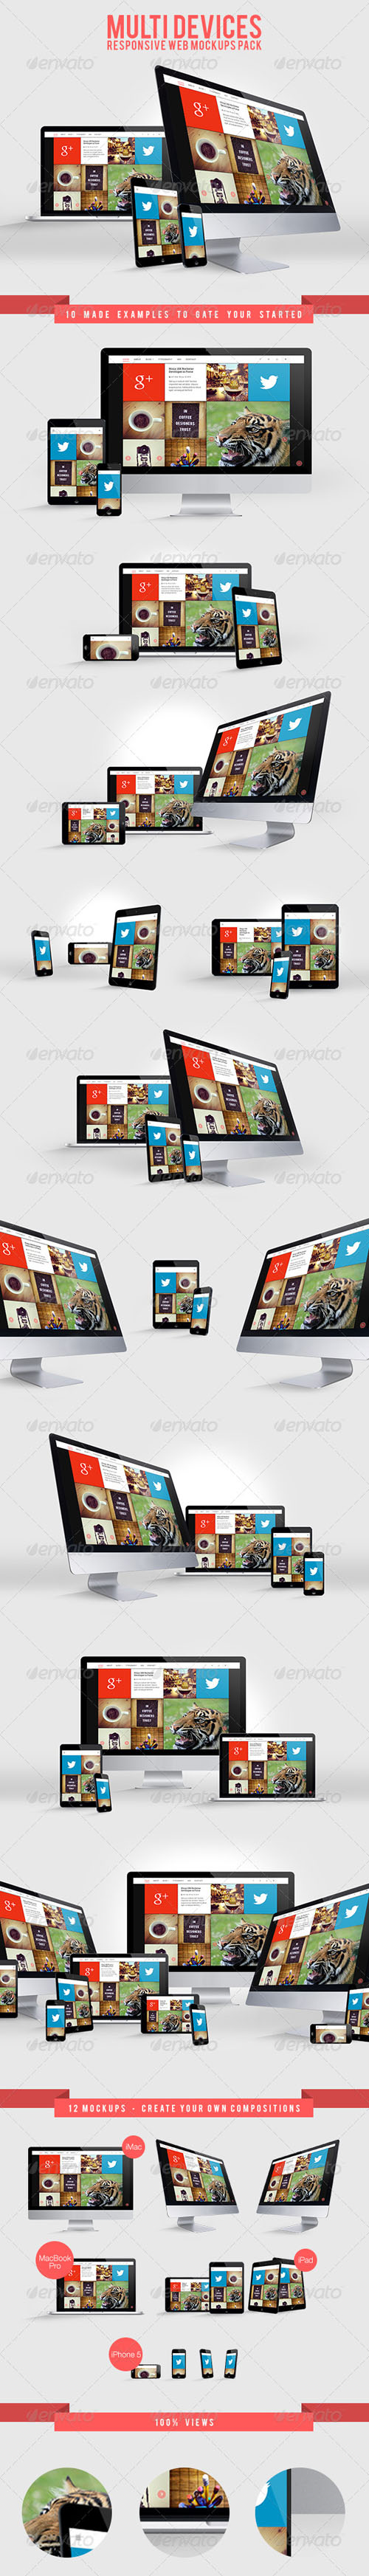 Graphicriver - Multi Devices Responsive Web Mockups Pack - id 7258281